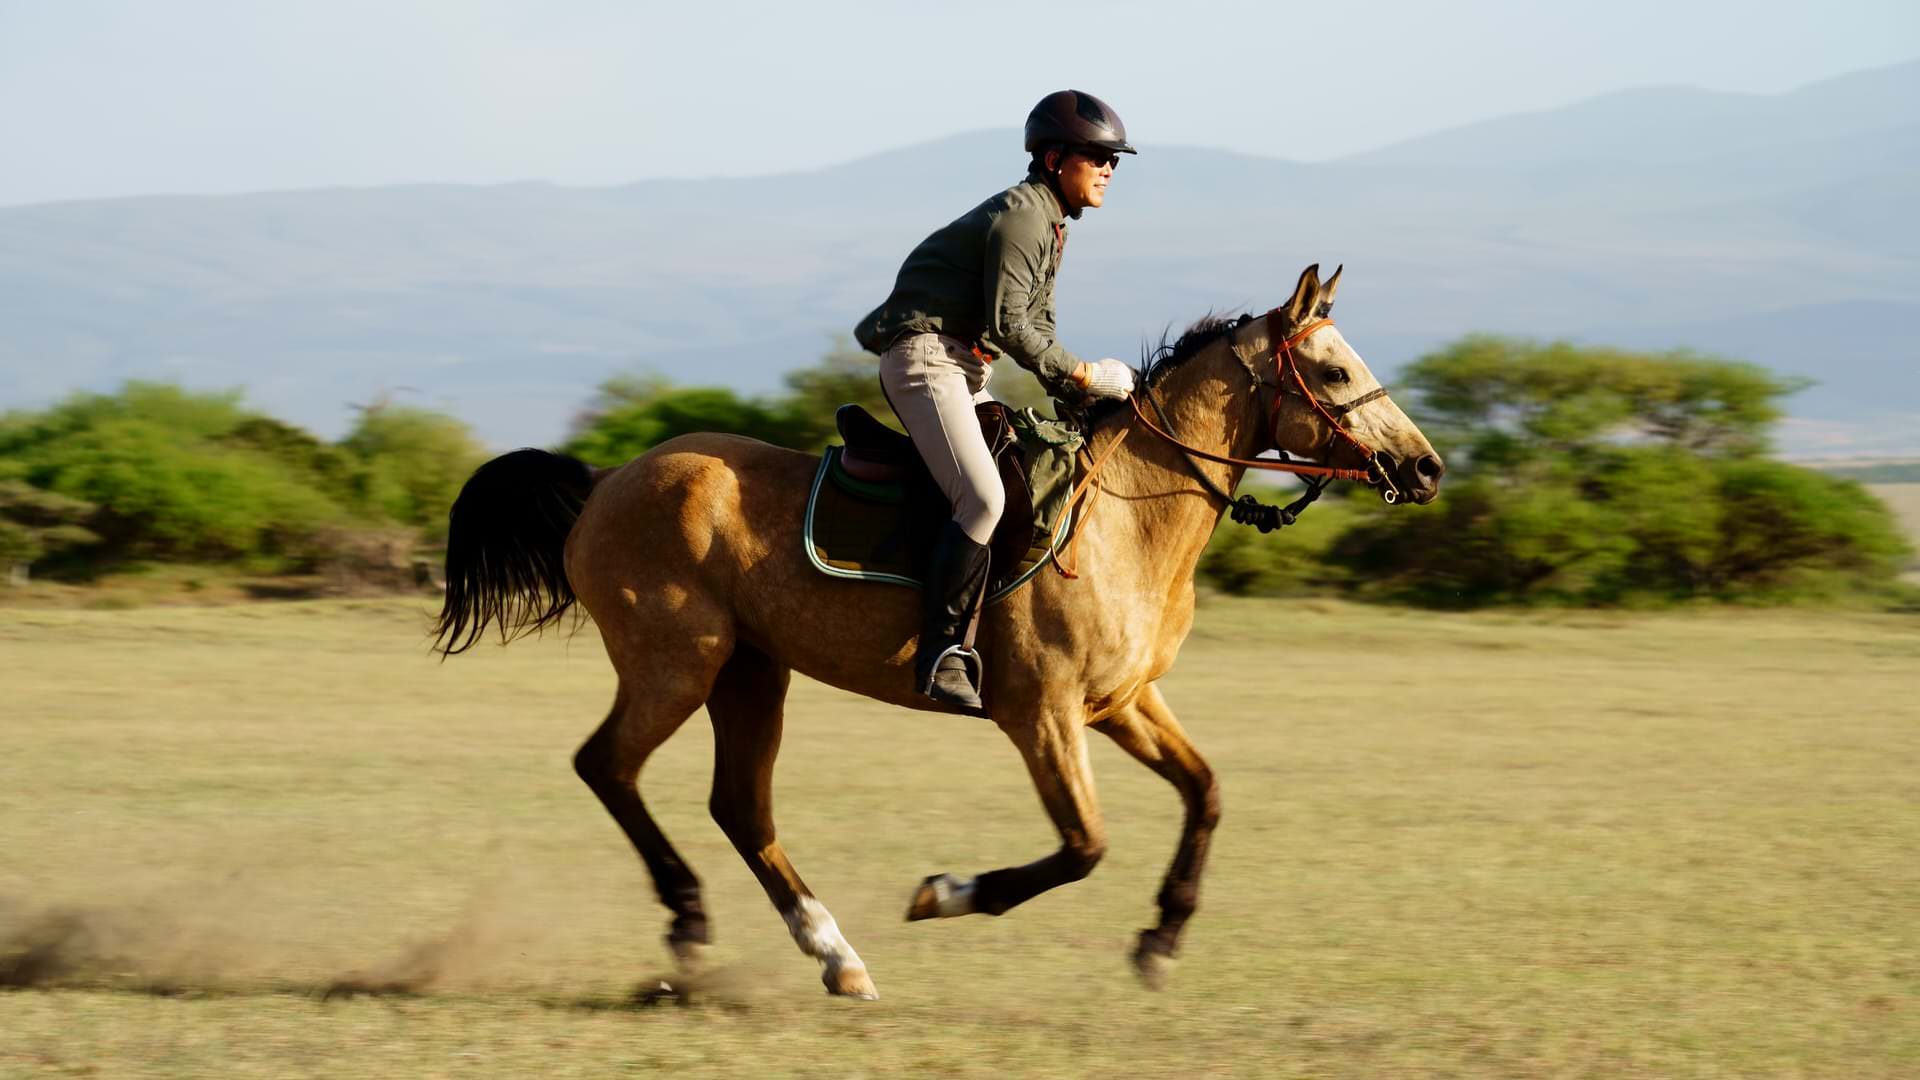 Rider and horse cantering across the Southern Serengeti plains